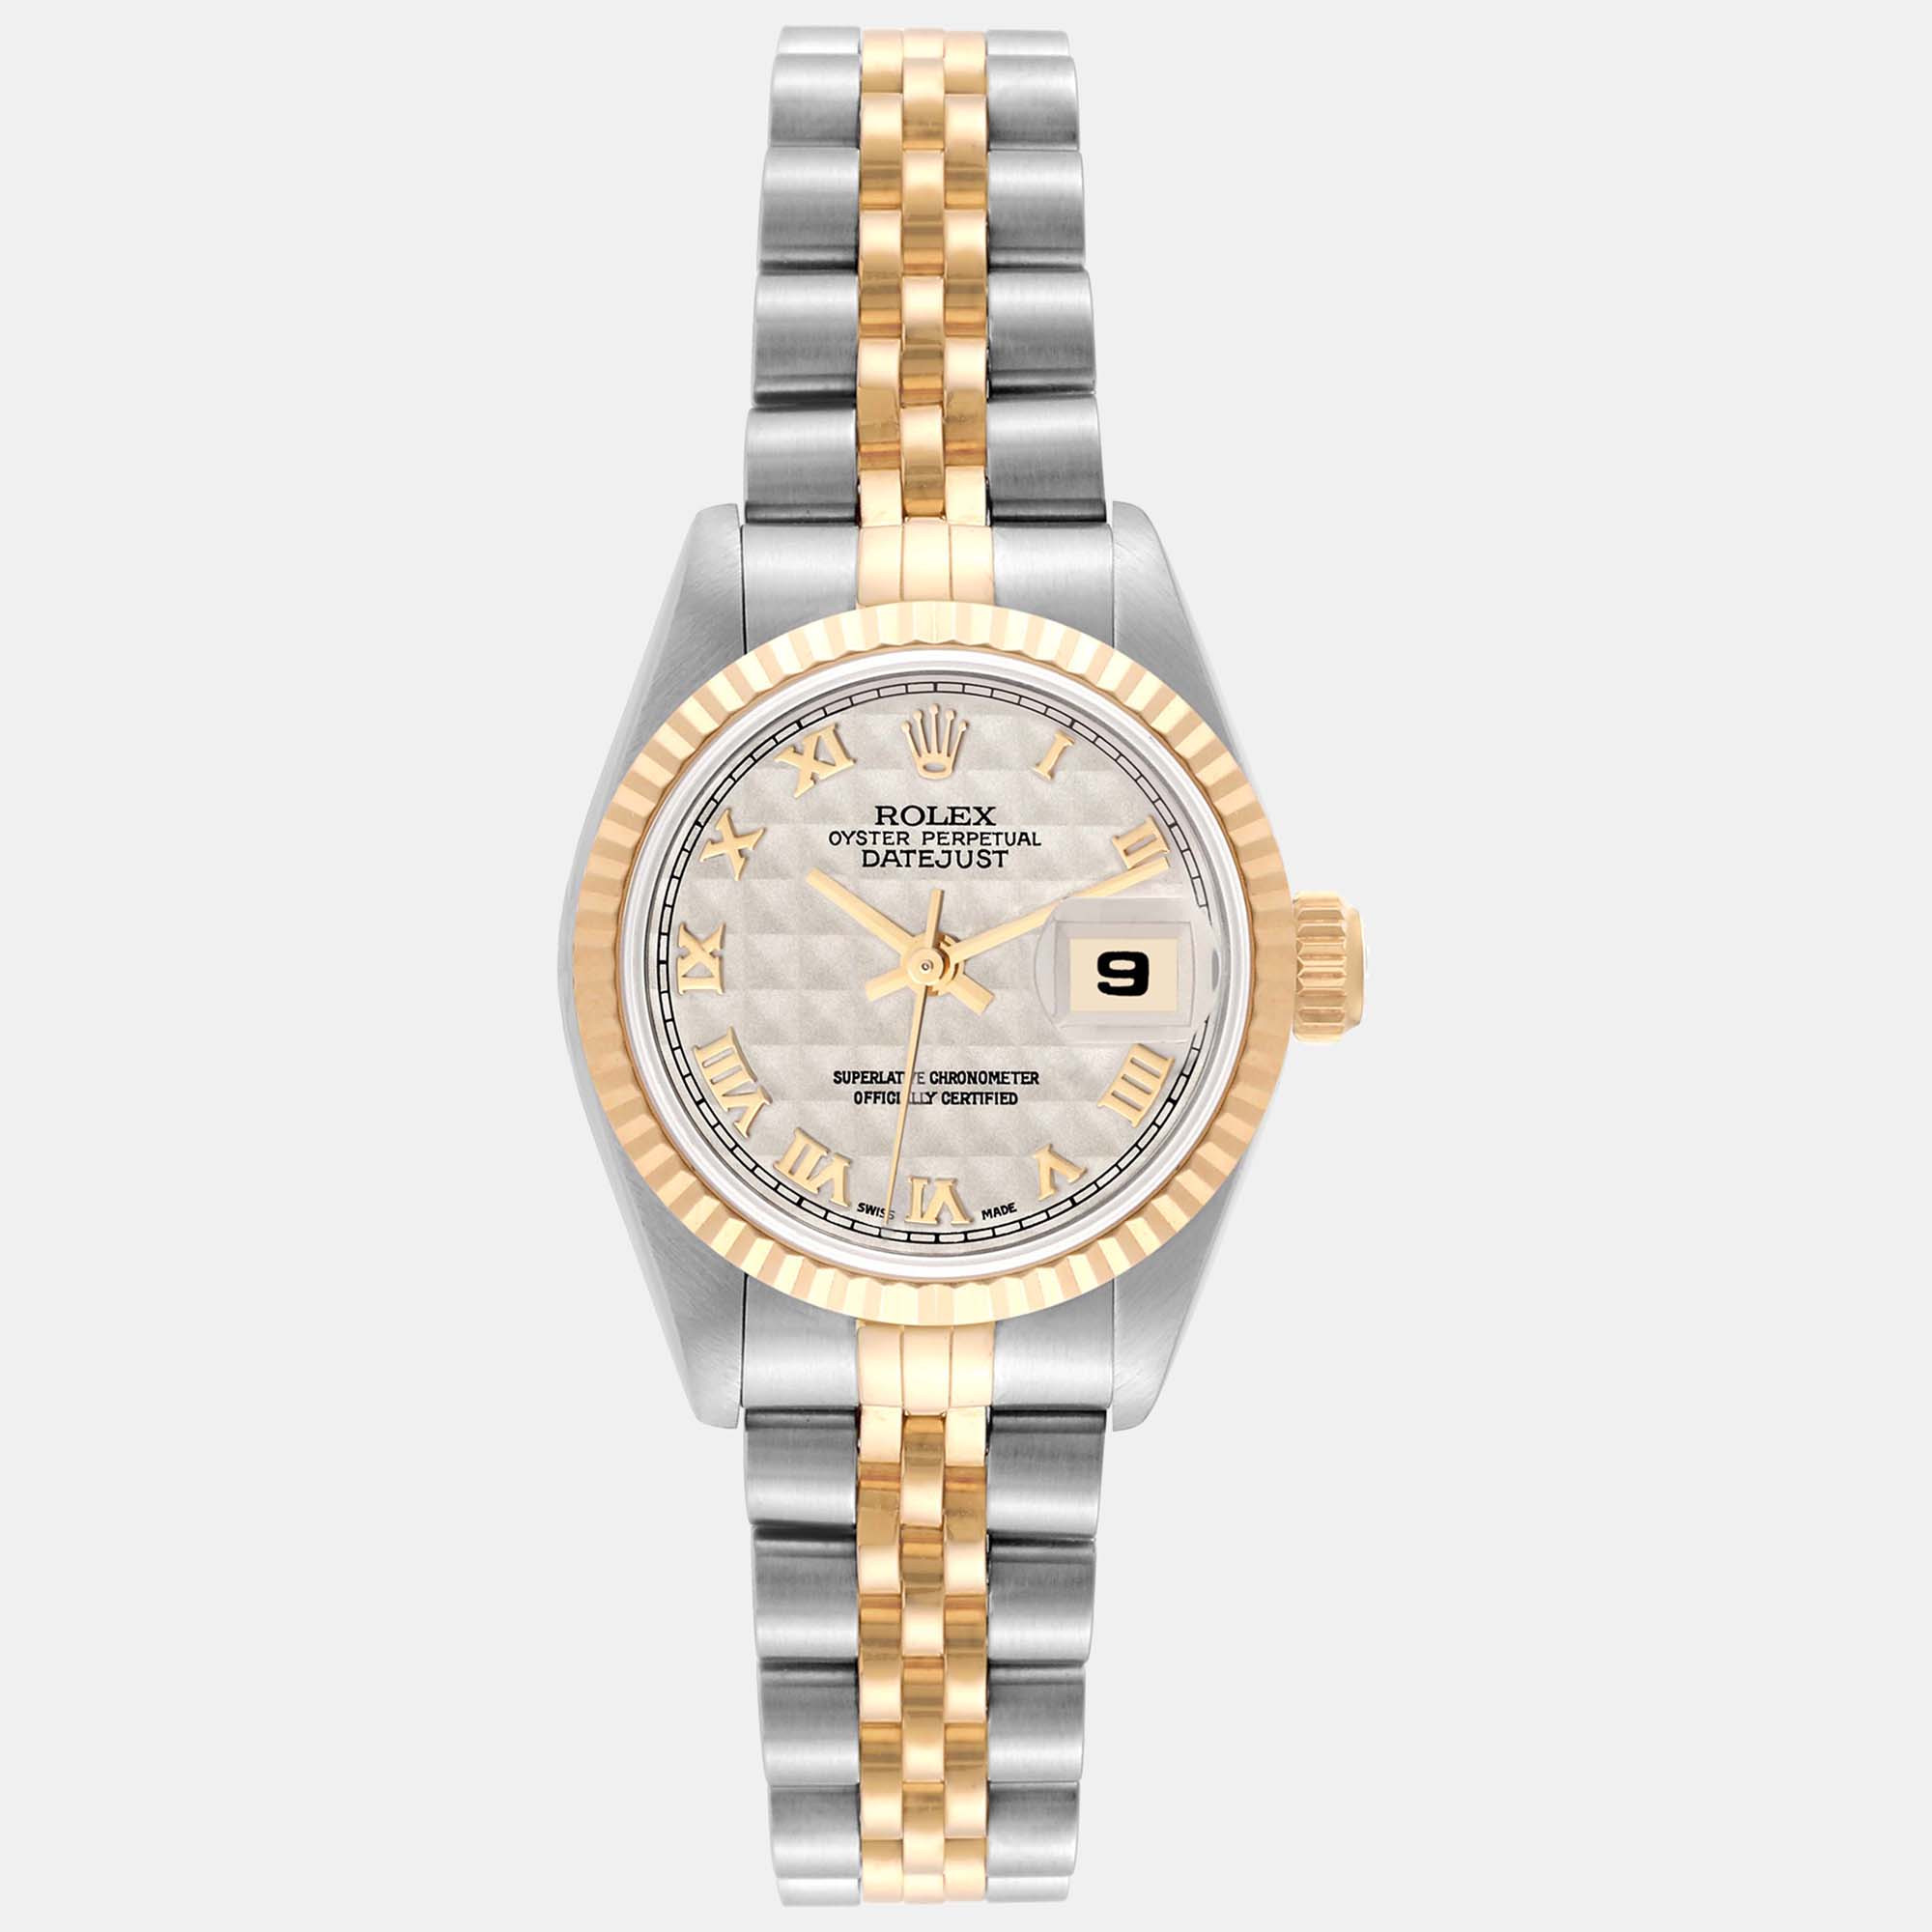 Rolex datejust pyramid dial steel yellow gold ladies watch 26 mm